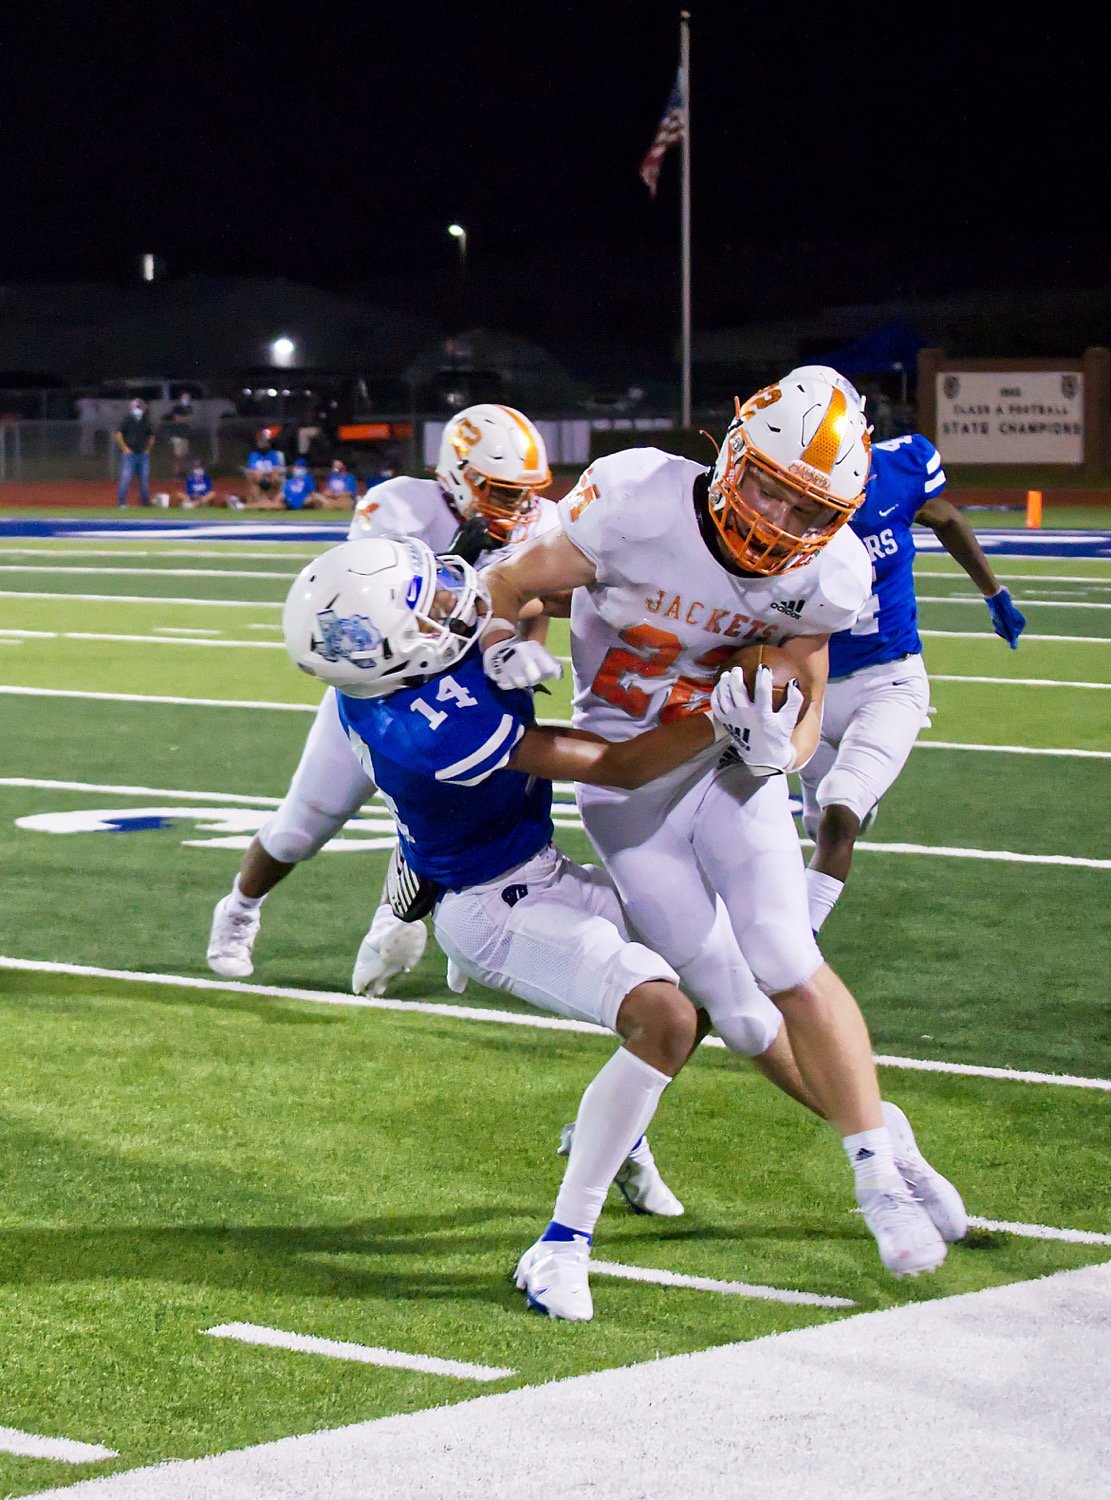 Dawson Pendergrass (22) of Mineola bulls ahead for extra yards in Friday’s 41-10 victory over the Wills Point Tigers. (Monitor photo by Sam Major)